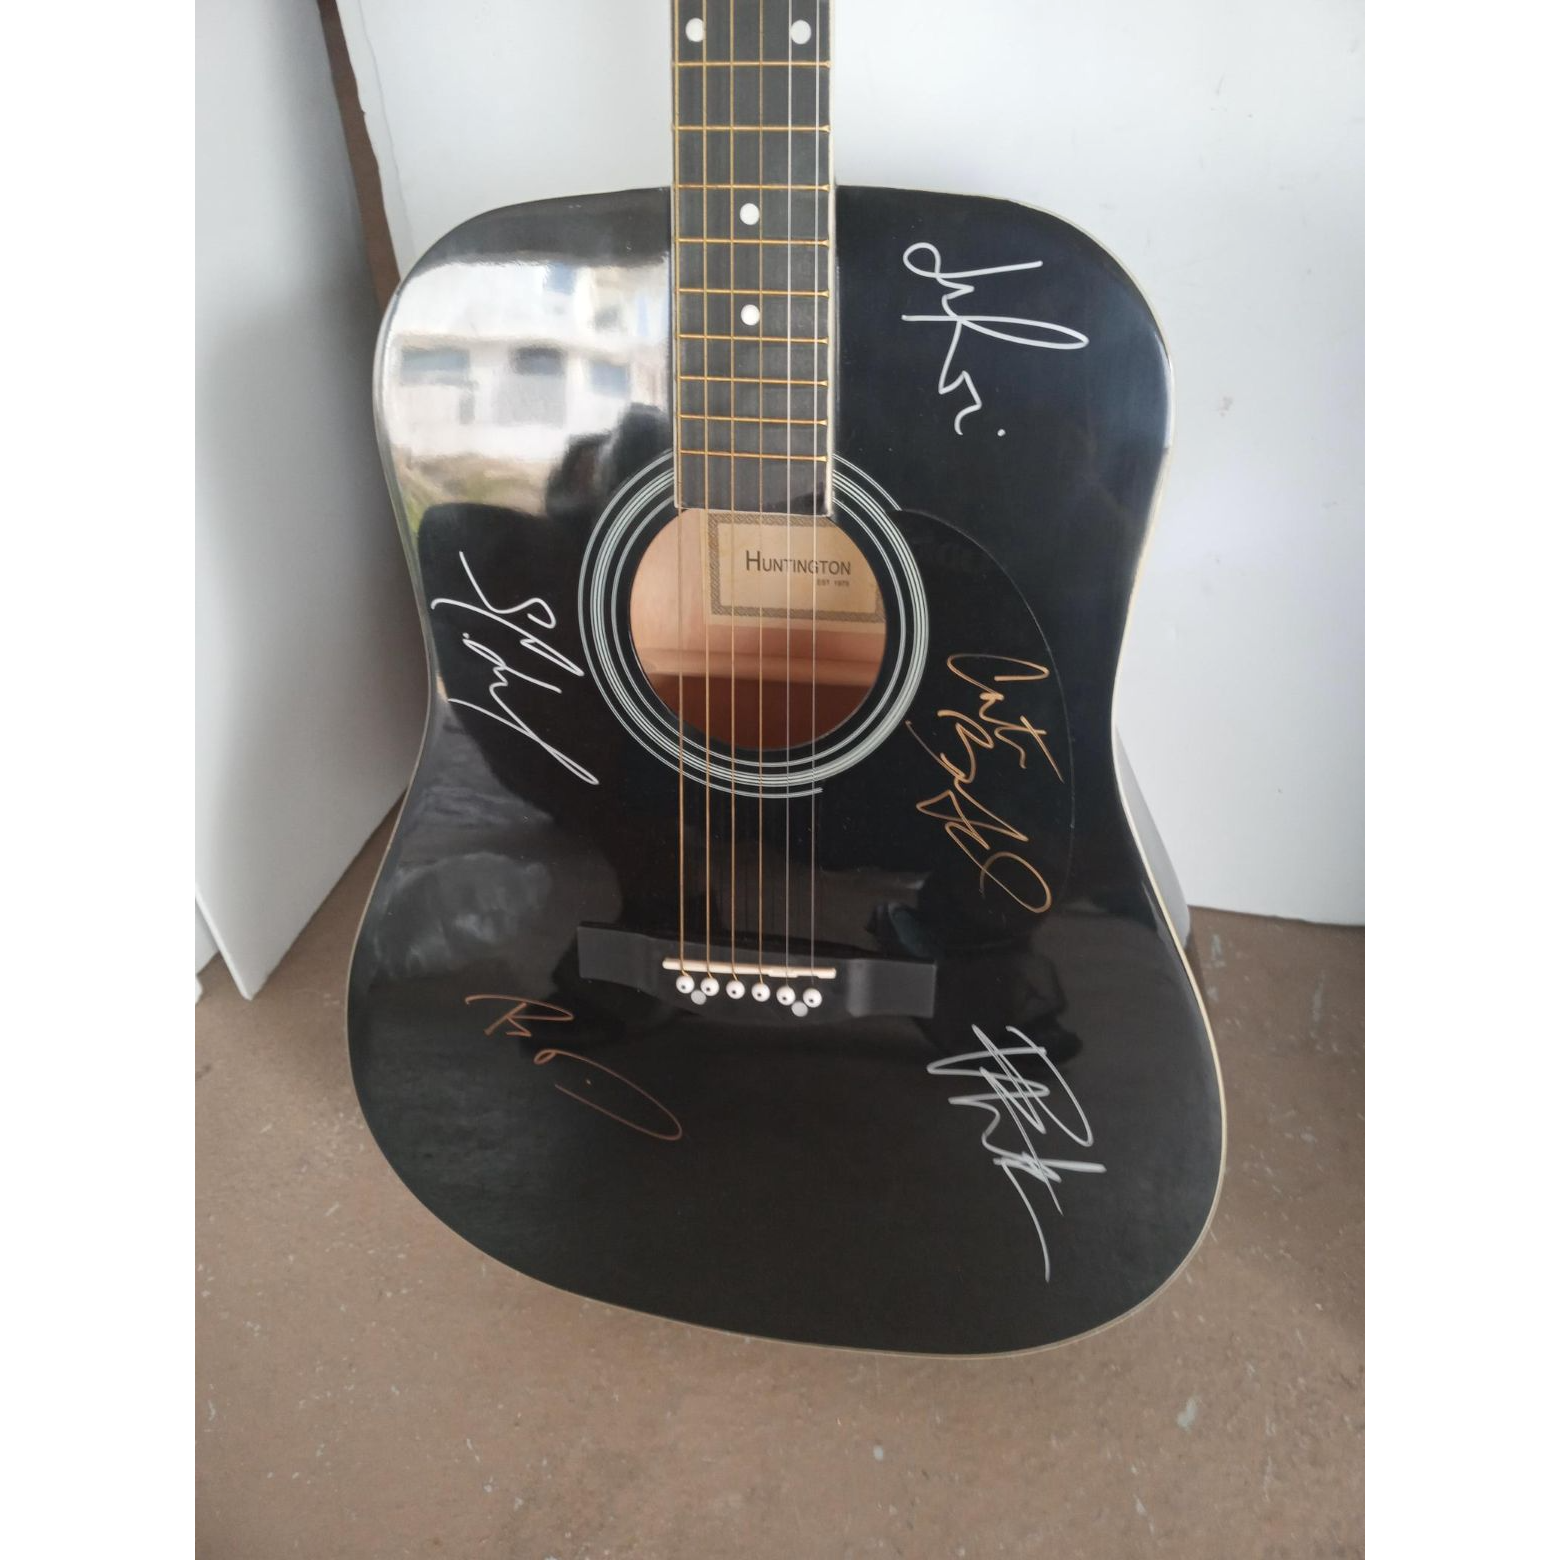 Dave Matthews, LeRoi Moore , Boyd Tinsley, Stephan Lessard, Carter Buford 39-in Huntington acoustic guitar signed with proof